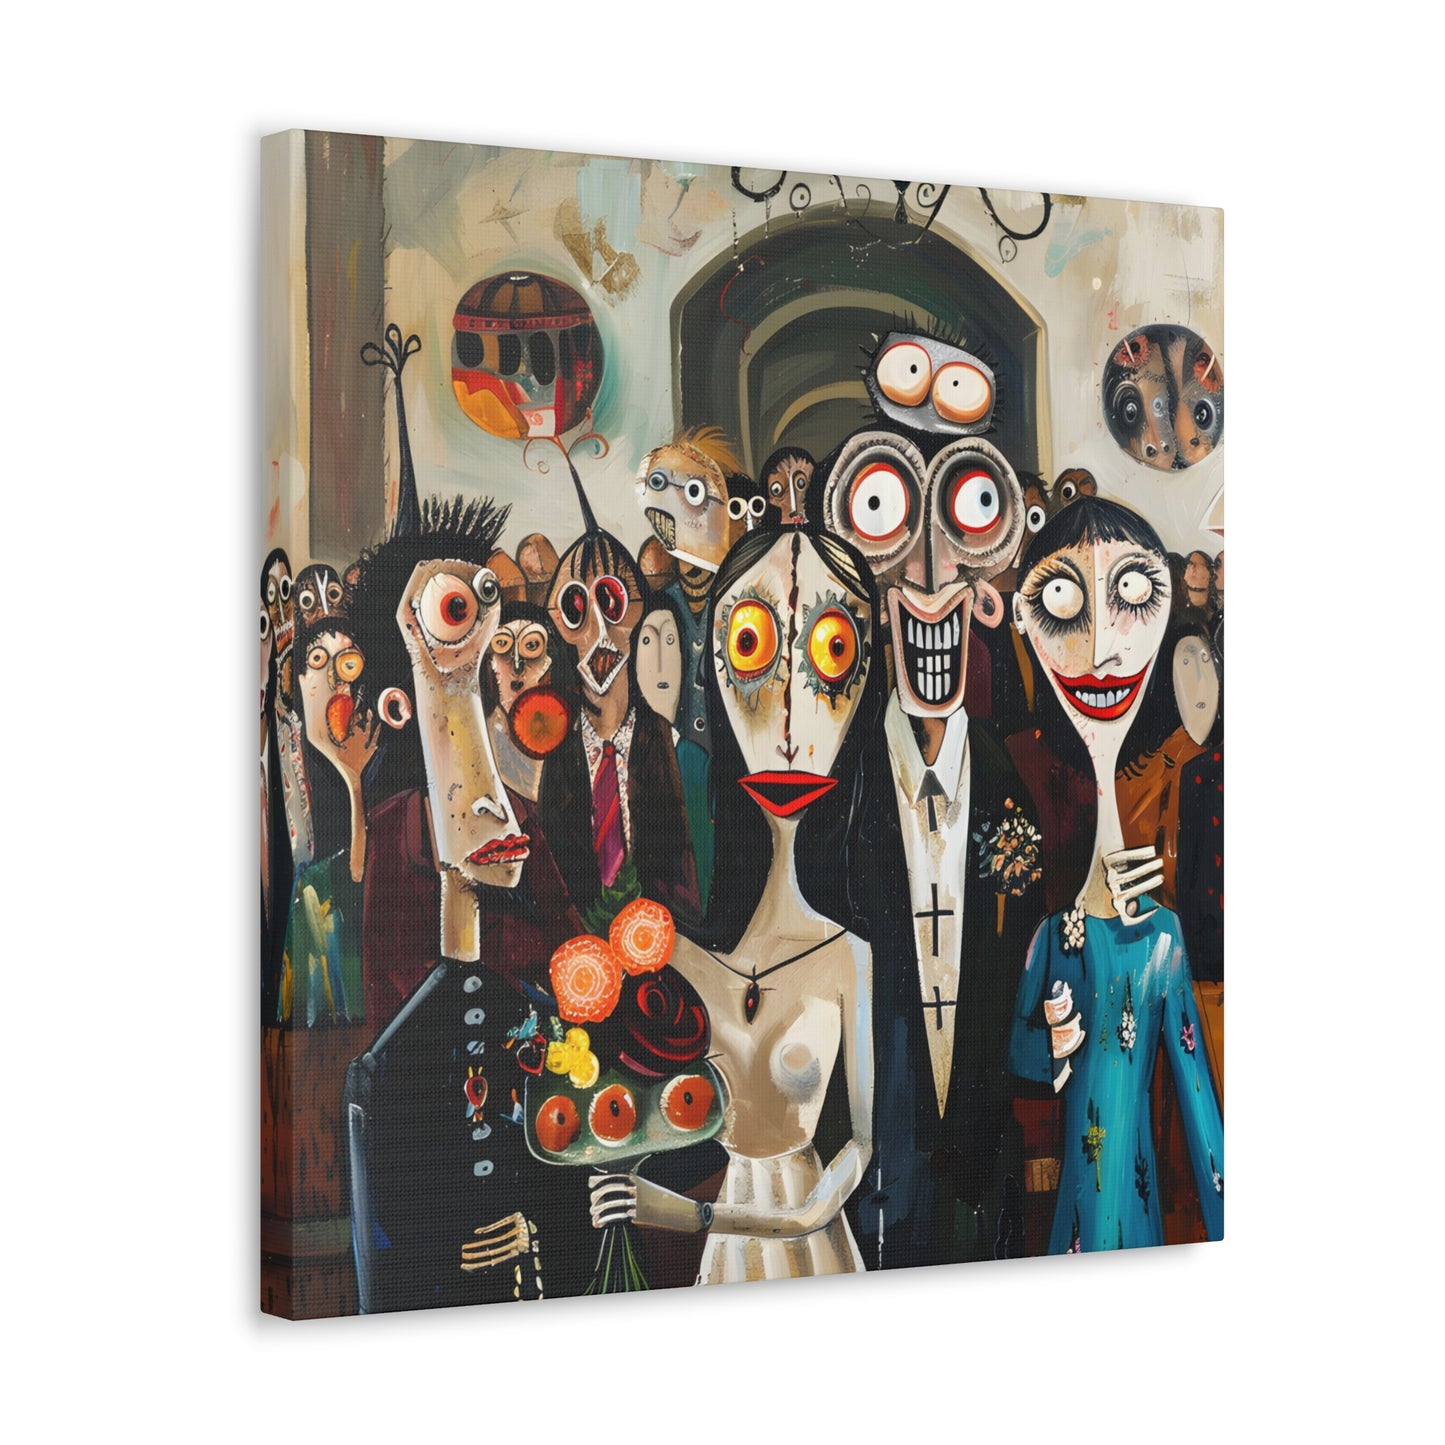 angled 1 Whimsical wedding scene with caricatured bride and groom, surrounded by guests with exaggerated, comical expressions, set against a backdrop of abstract and surreal elements\